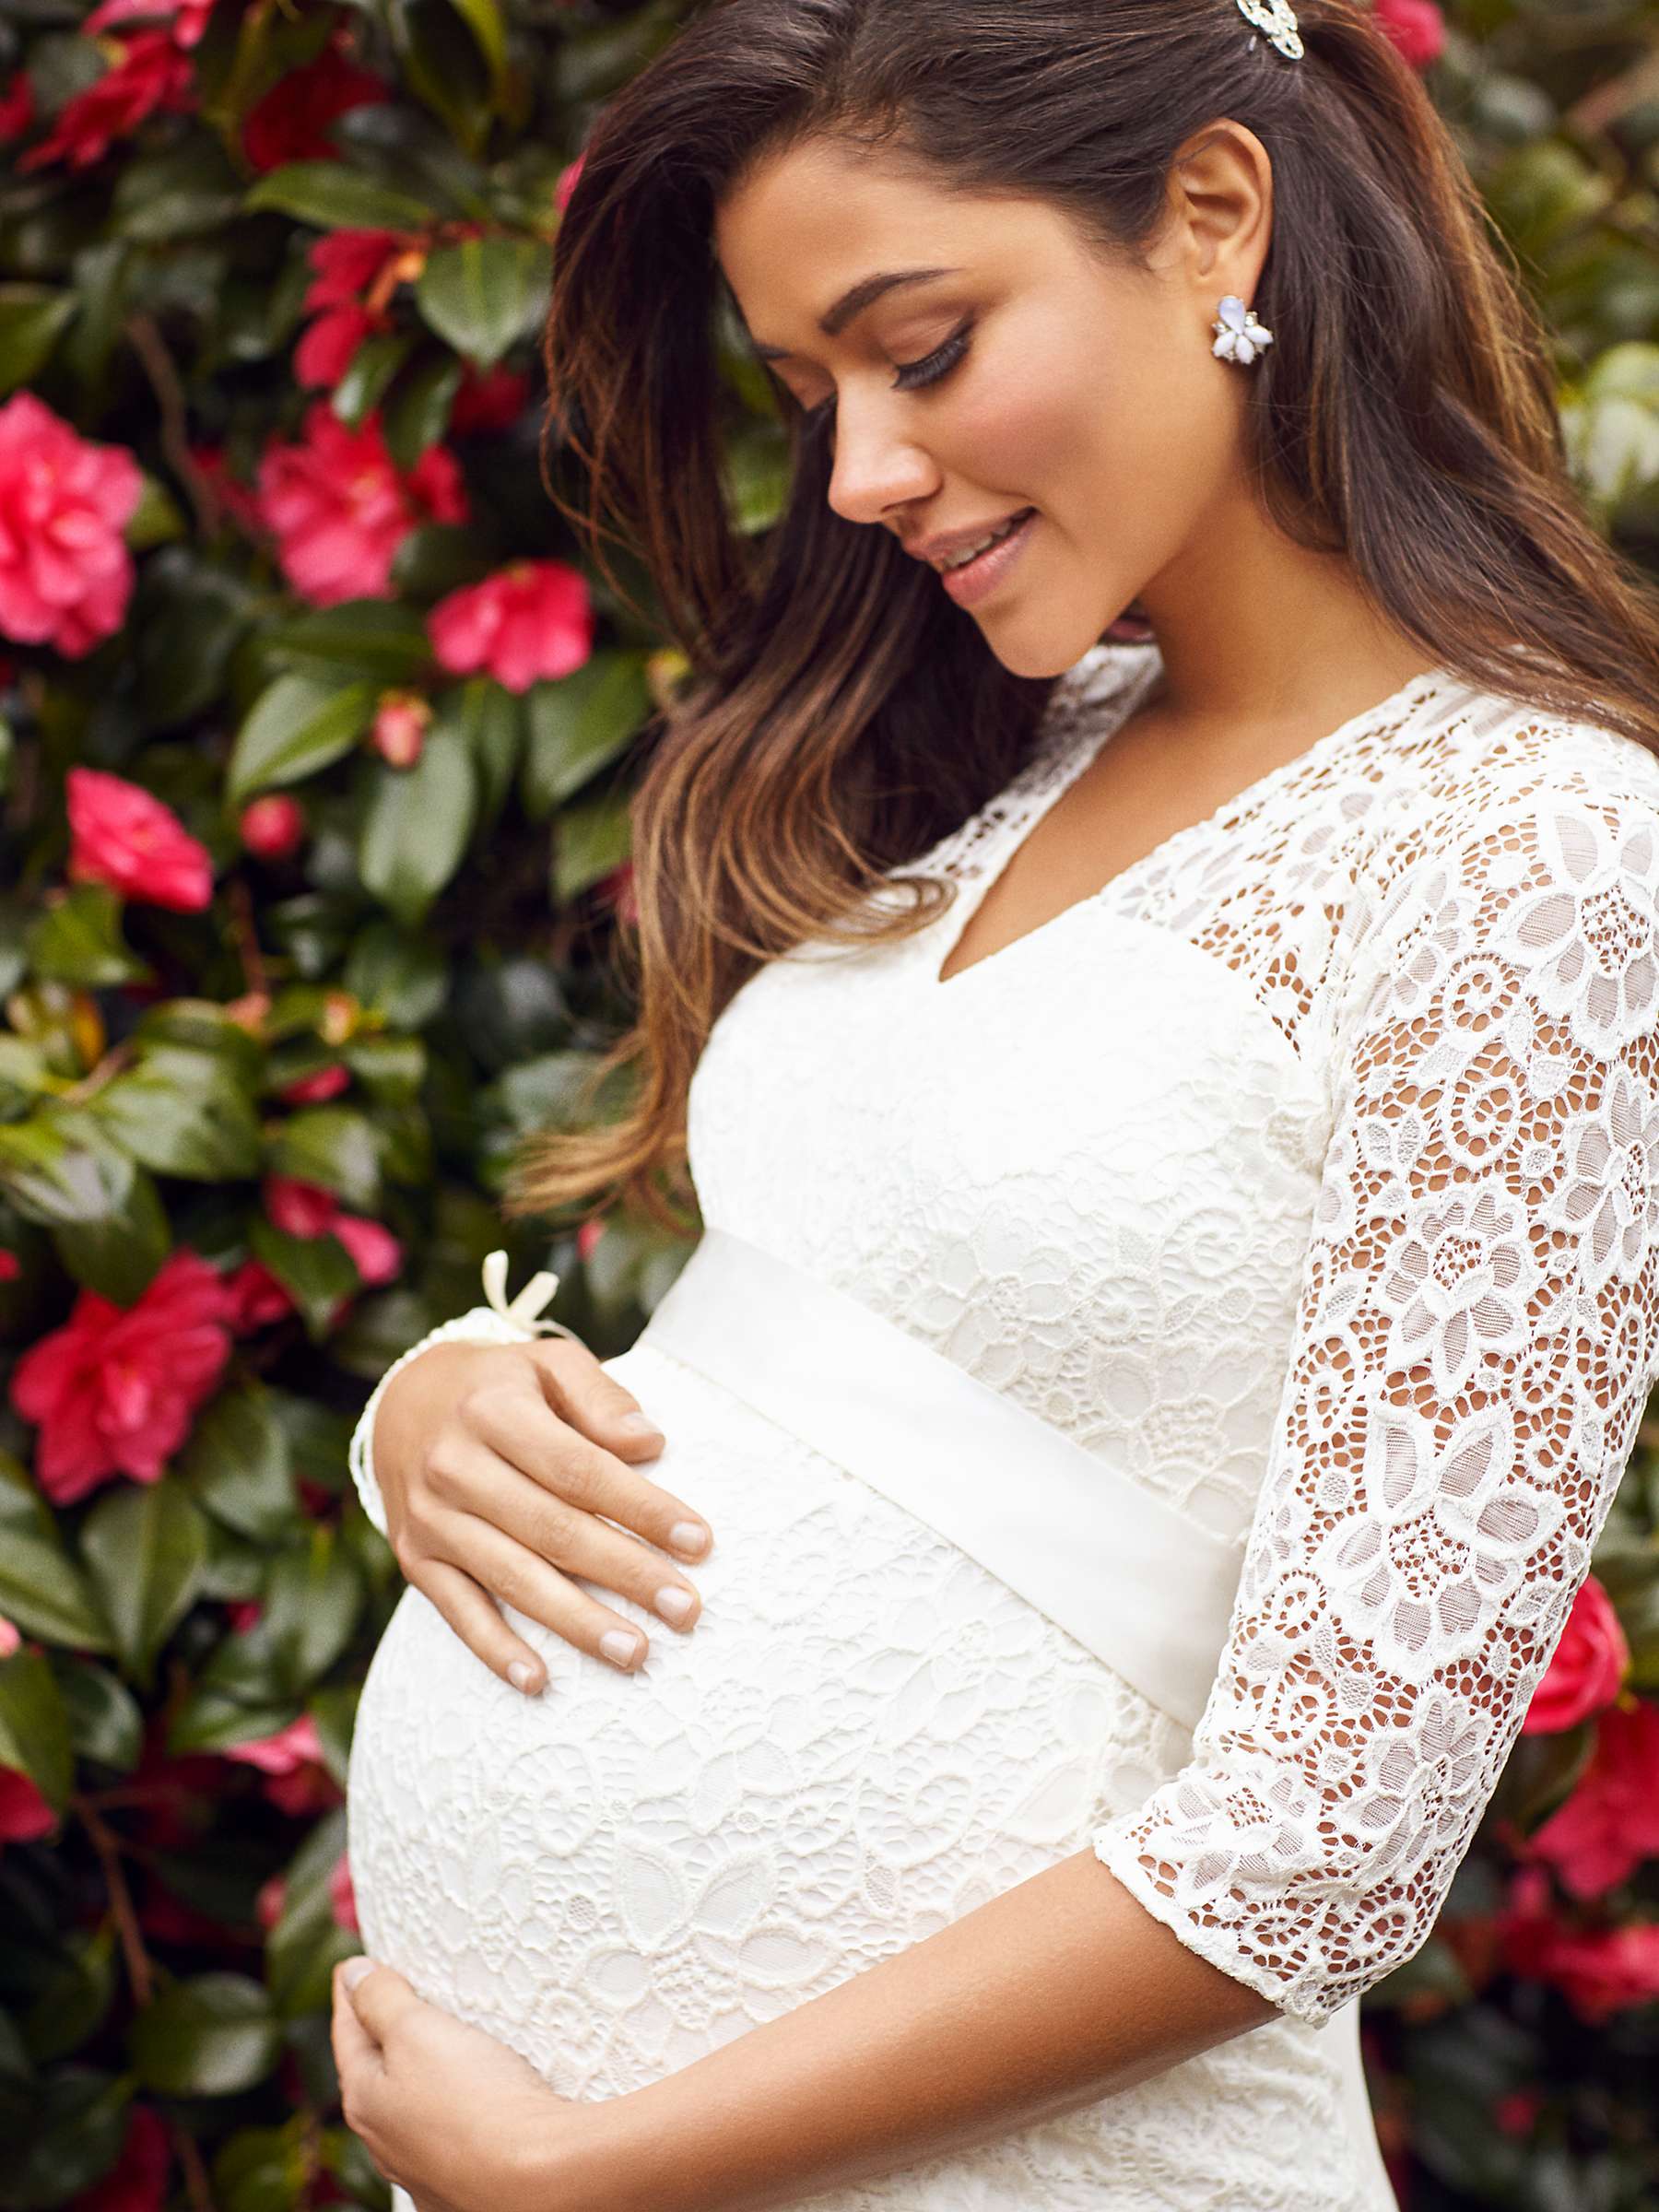 Buy Tiffany Rose Suzie Maternity Floral Lace Wedding Dress, Ivory Online at johnlewis.com